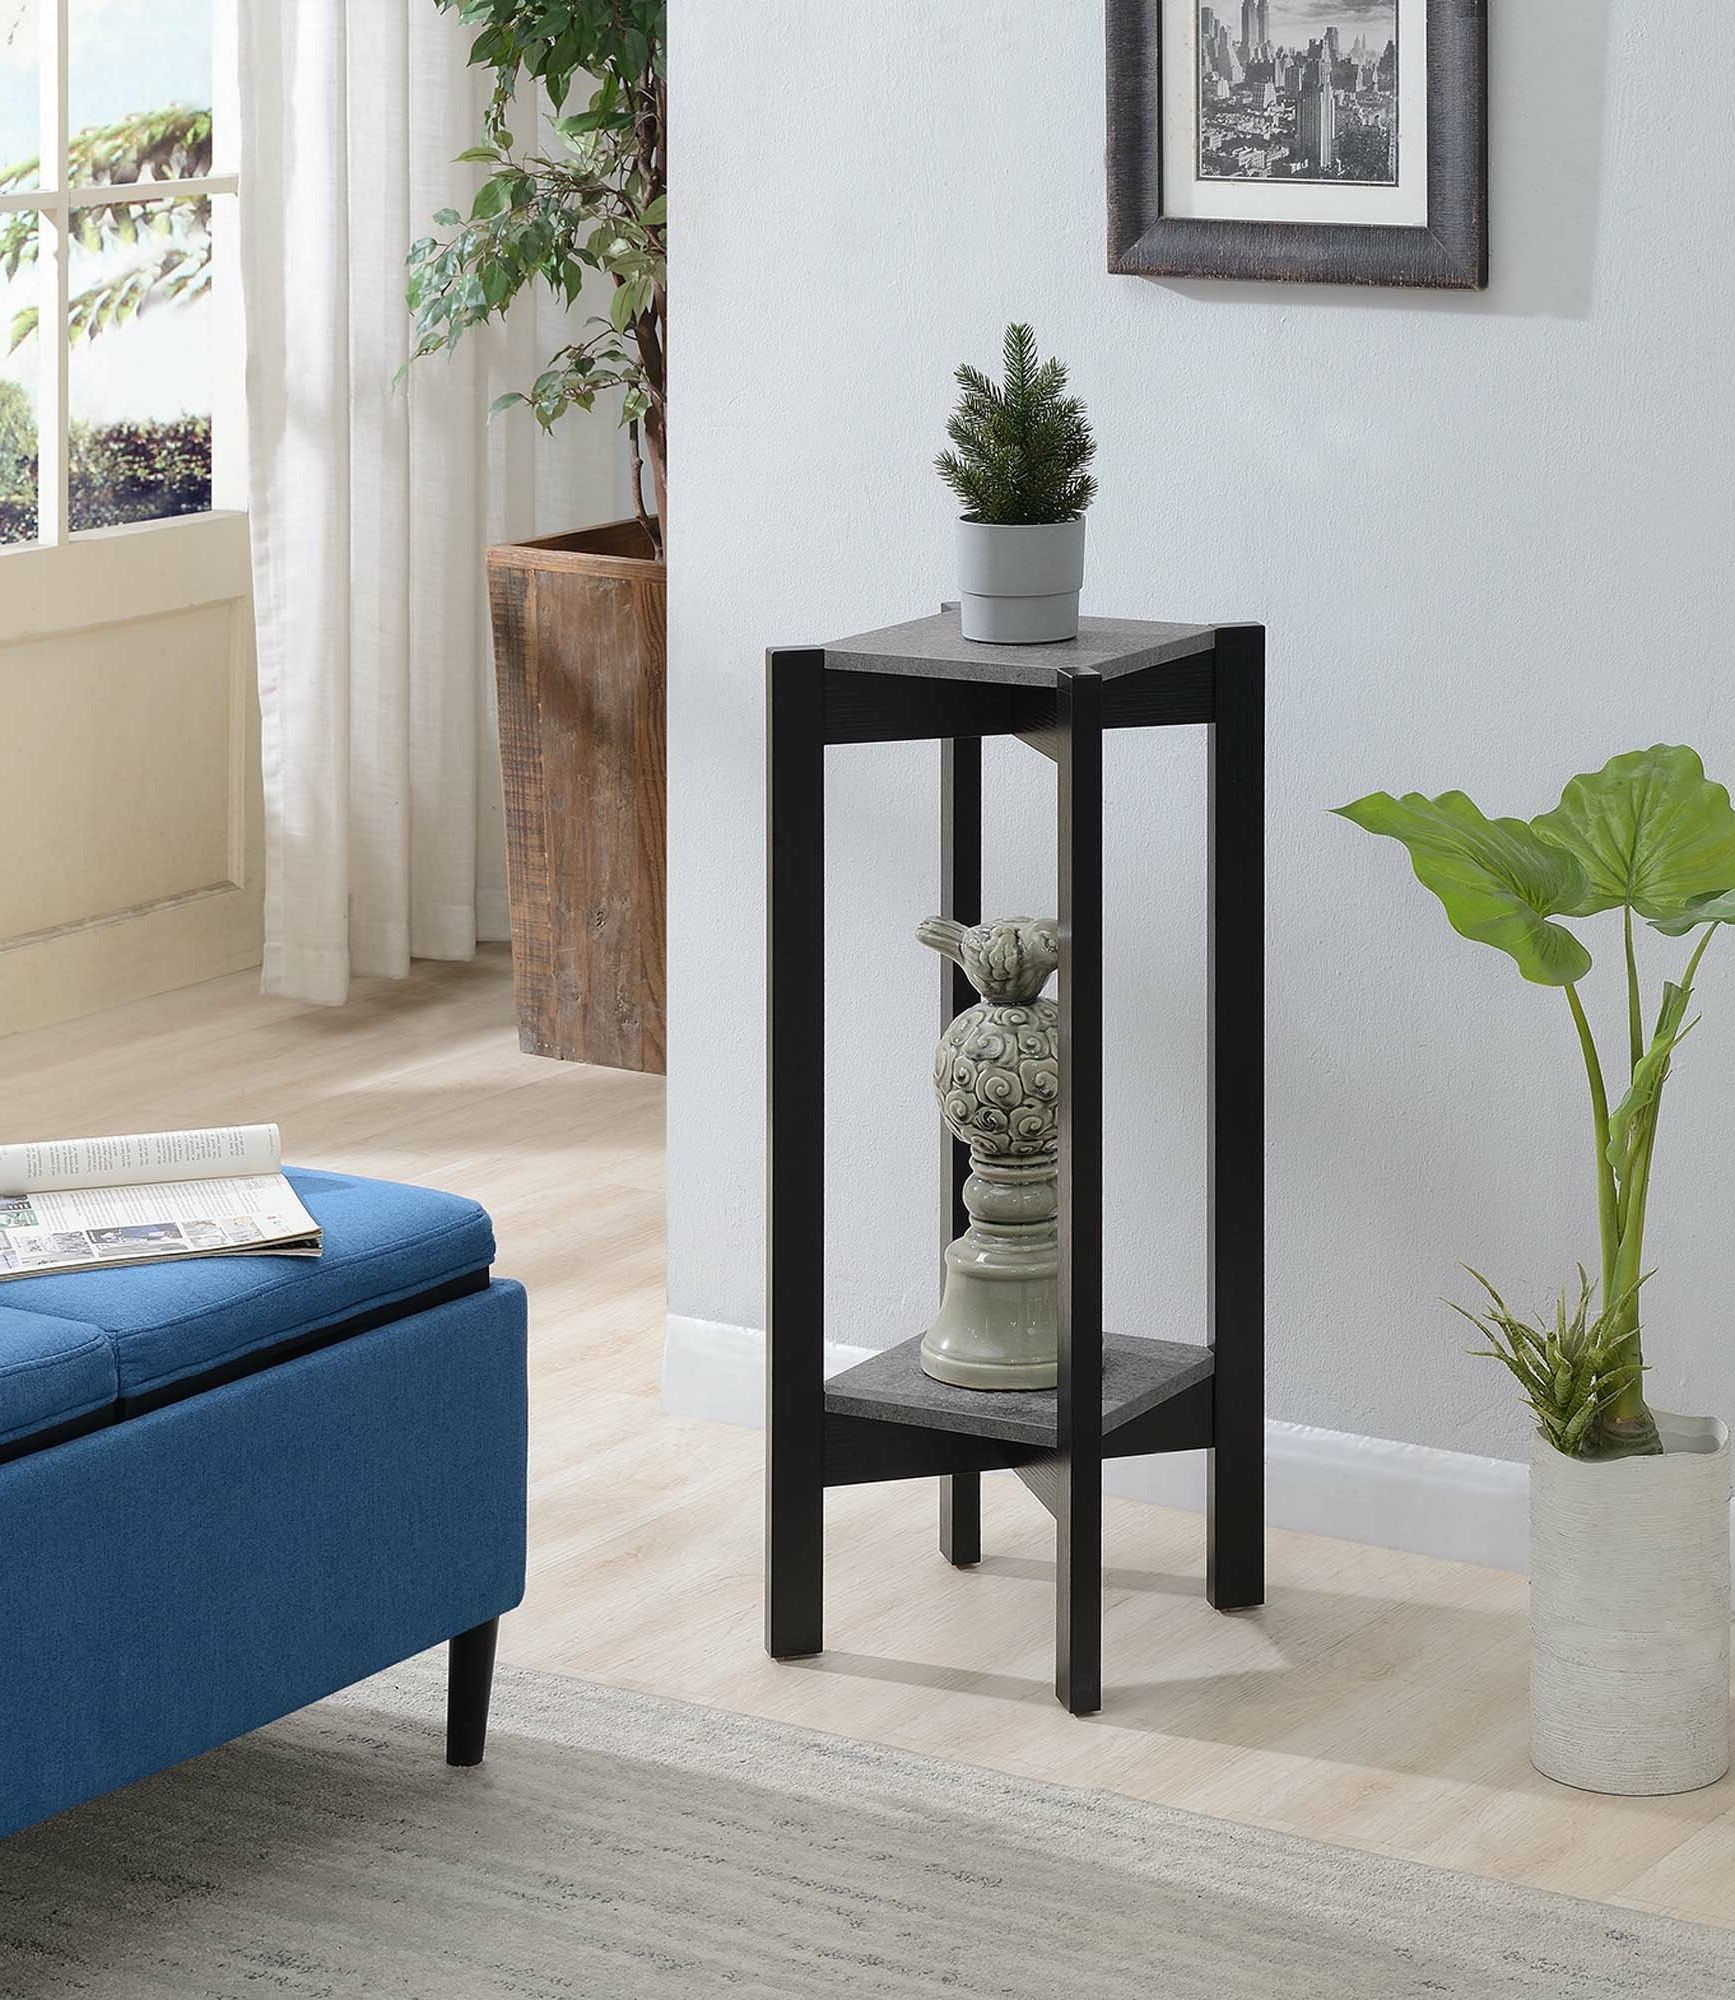 Well Liked Ebern Designs Corto Square Pedestal Plant Stand & Reviews (View 14 of 15)